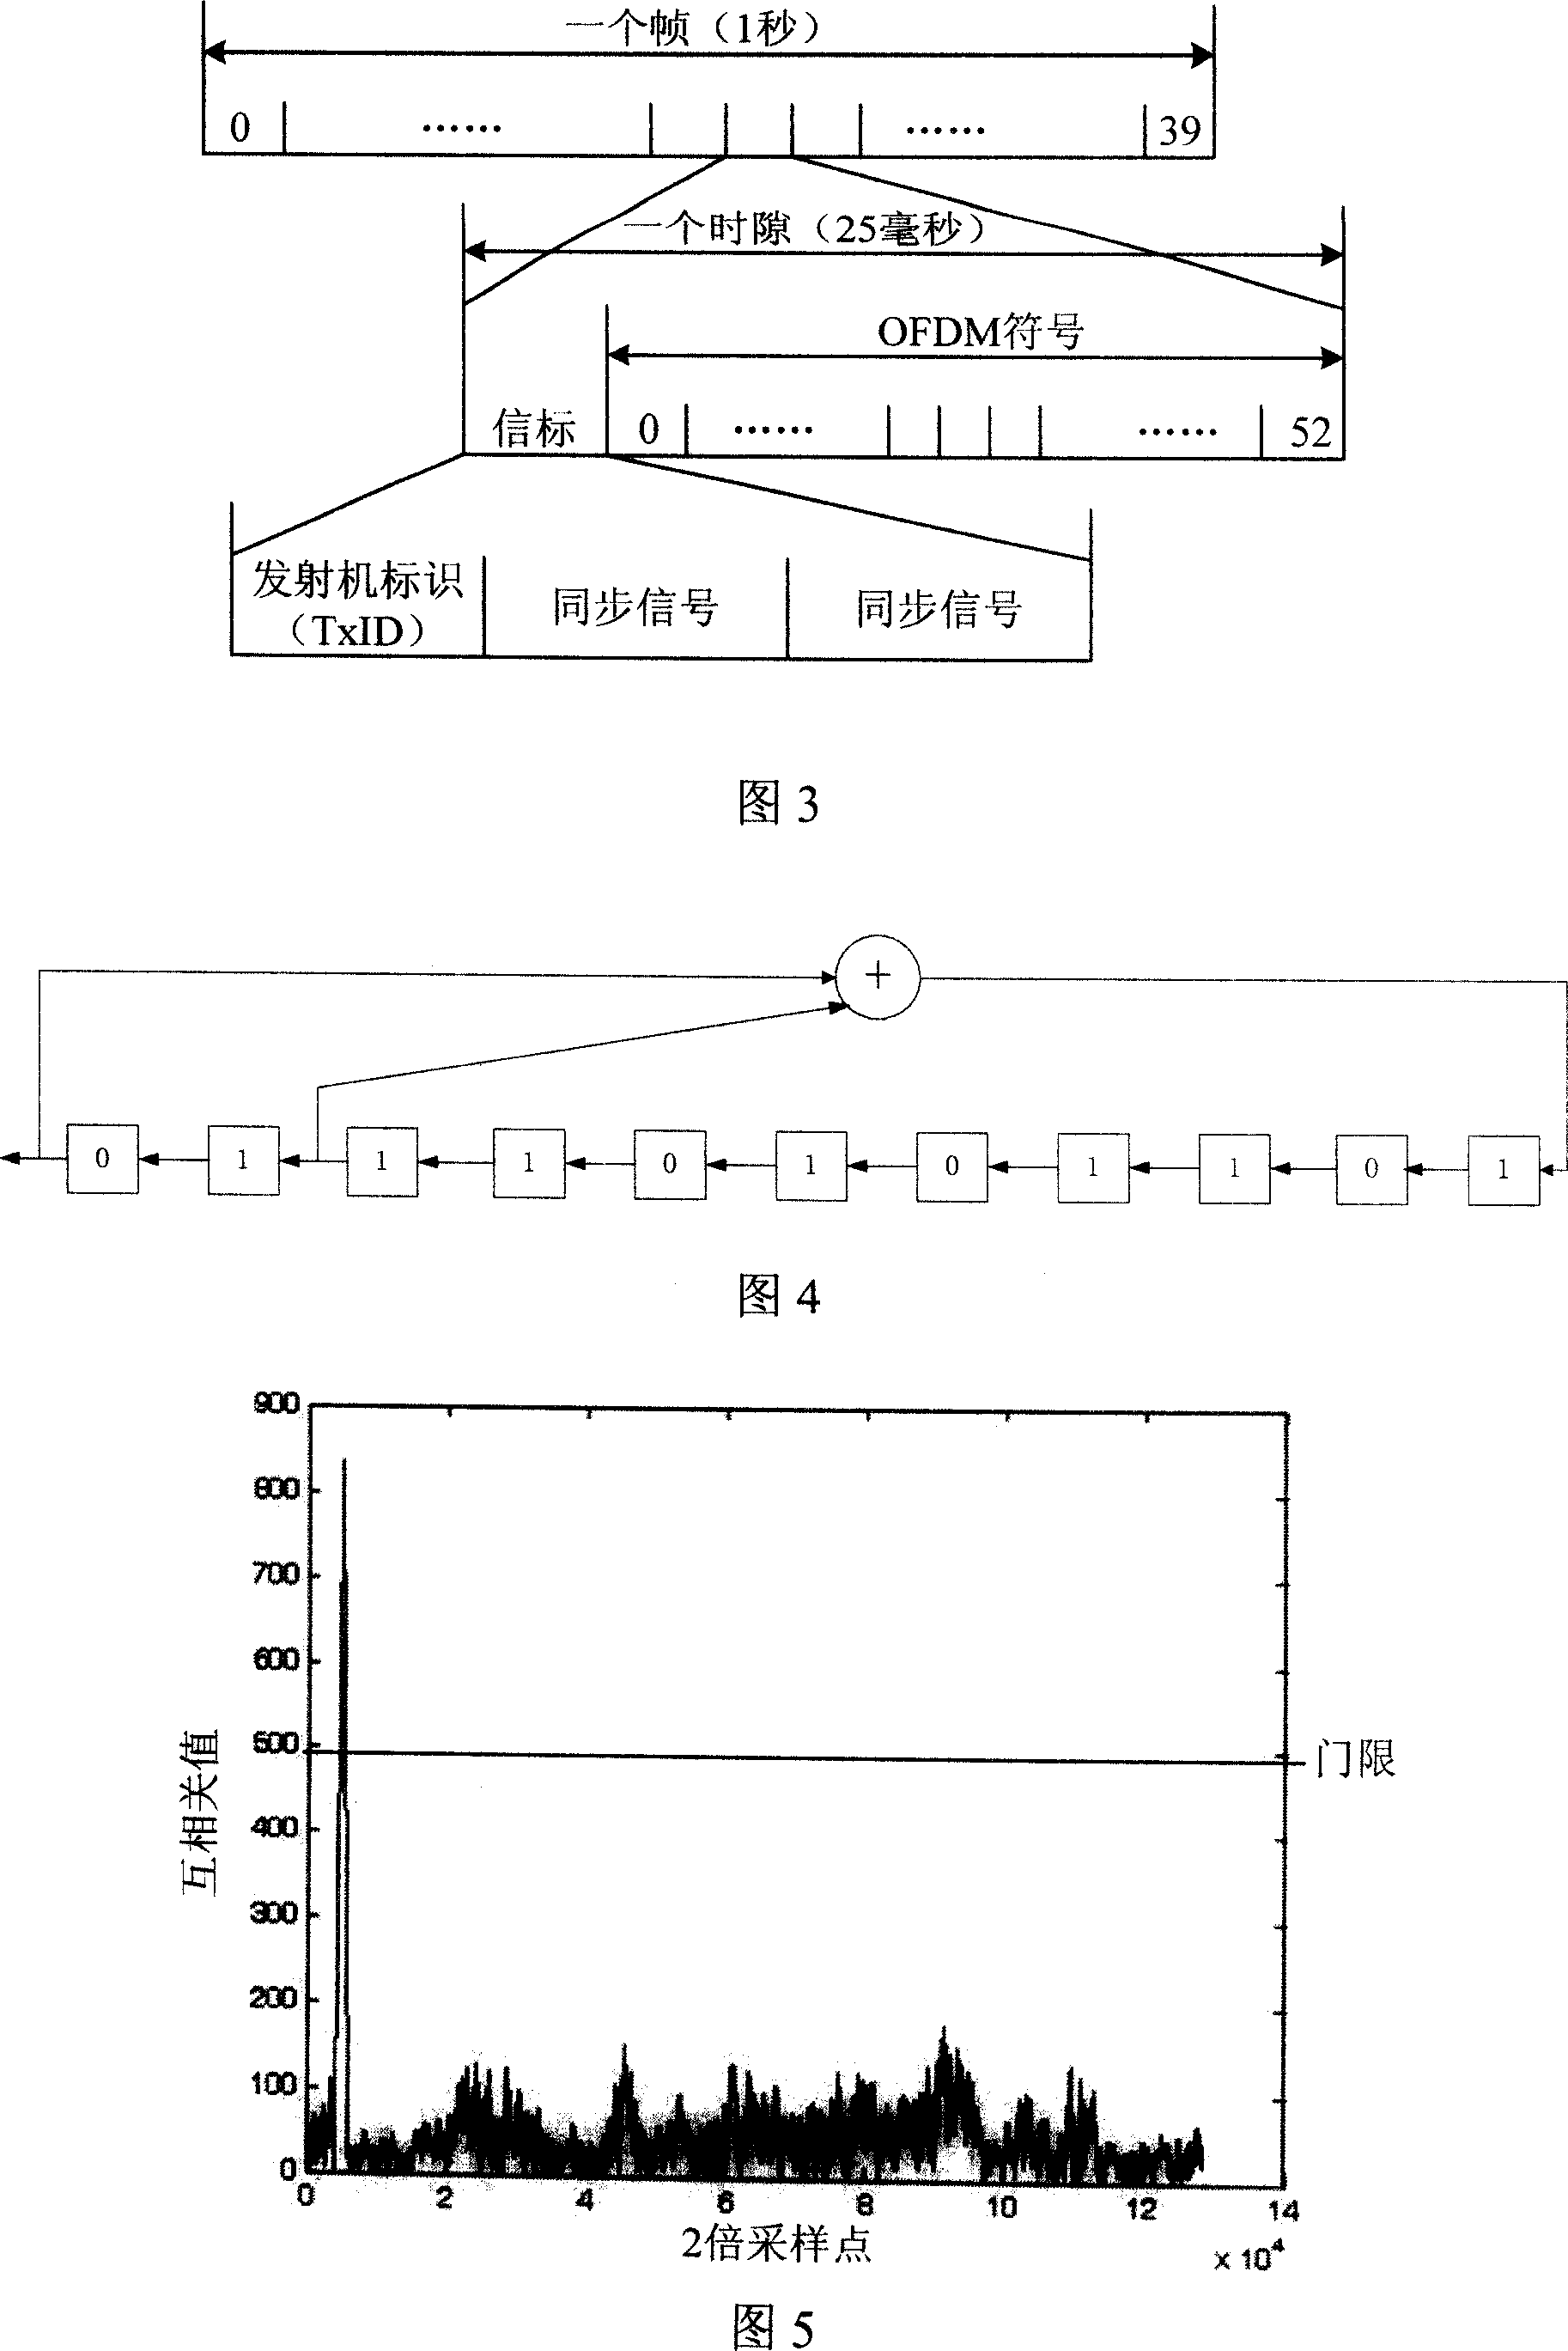 OFDM symbol and frequency synchronization and channel style estimating method